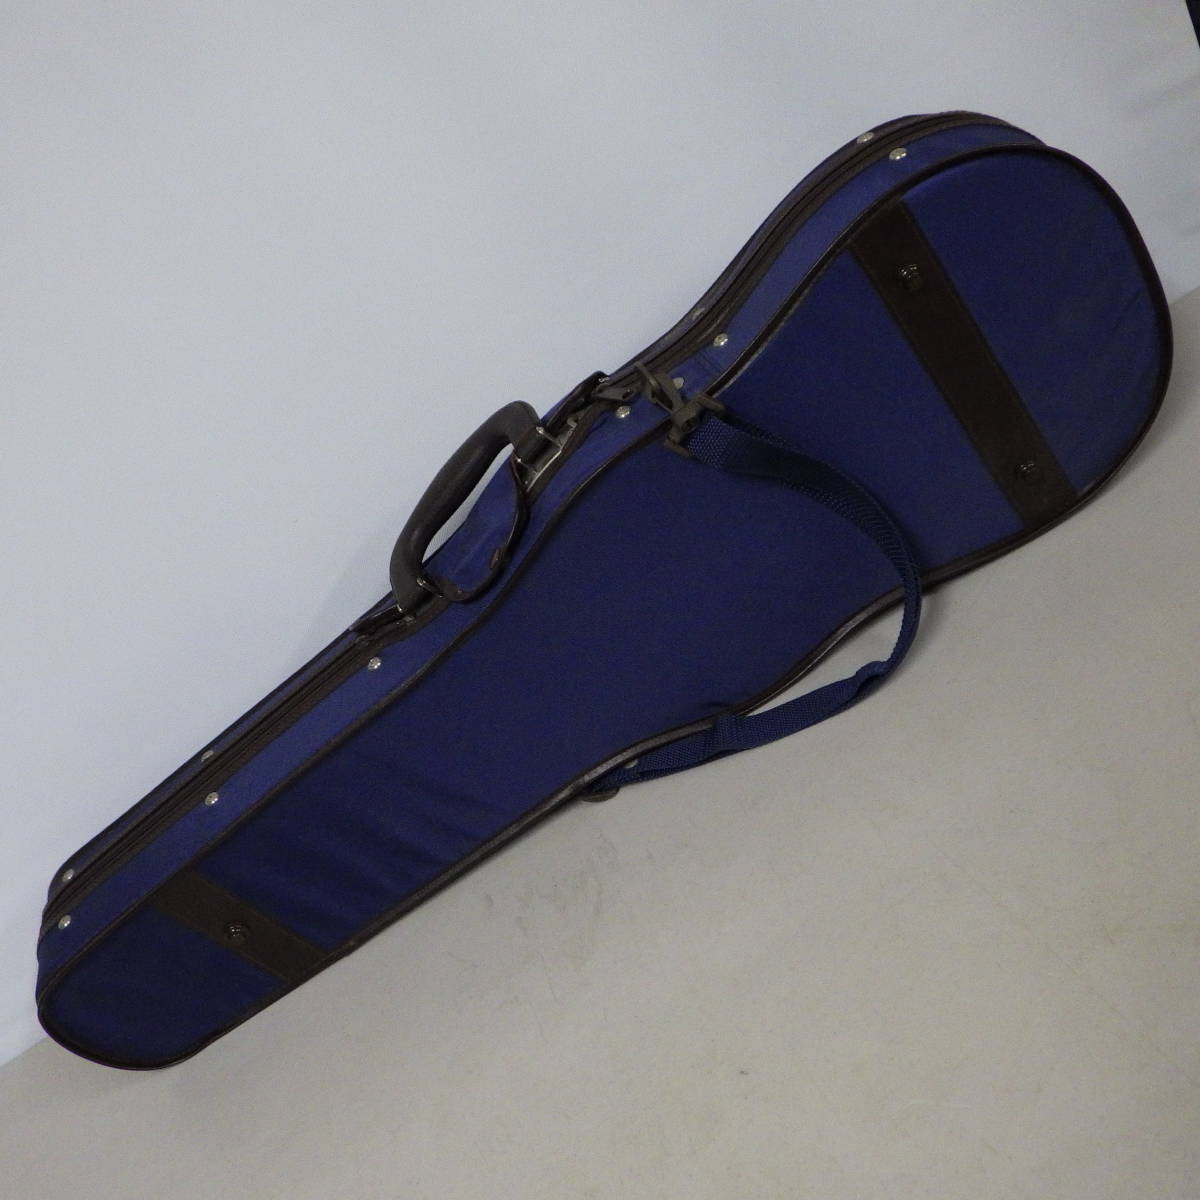 39 Orient musical instruments violin case va Io Lynn case Shell-One total length approximately 76cm degree key attaching 